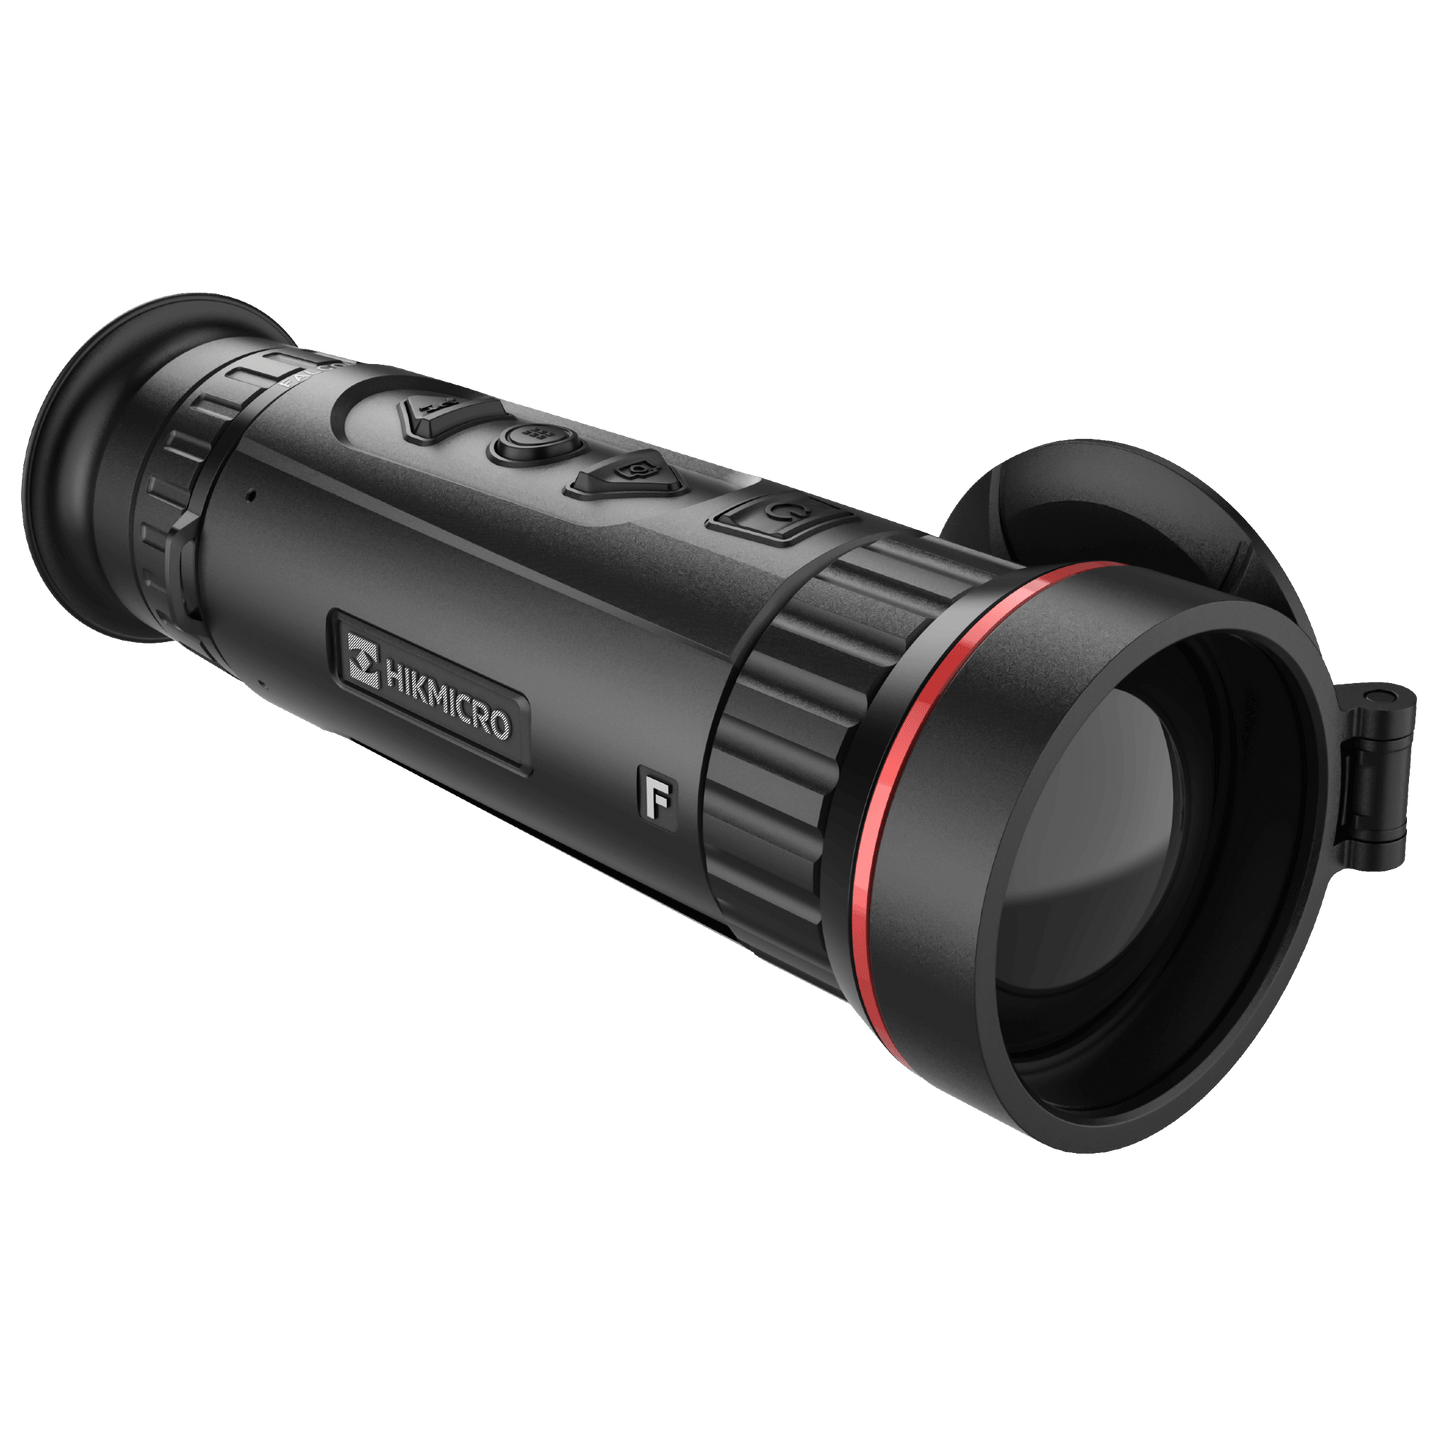 HikMicro Thermal Imaging Monocular for Sale - HikMicro Falcon Series FQ50 - HM-TS46-35XG_W-FQ50 -  Front Right View no Lens Cap